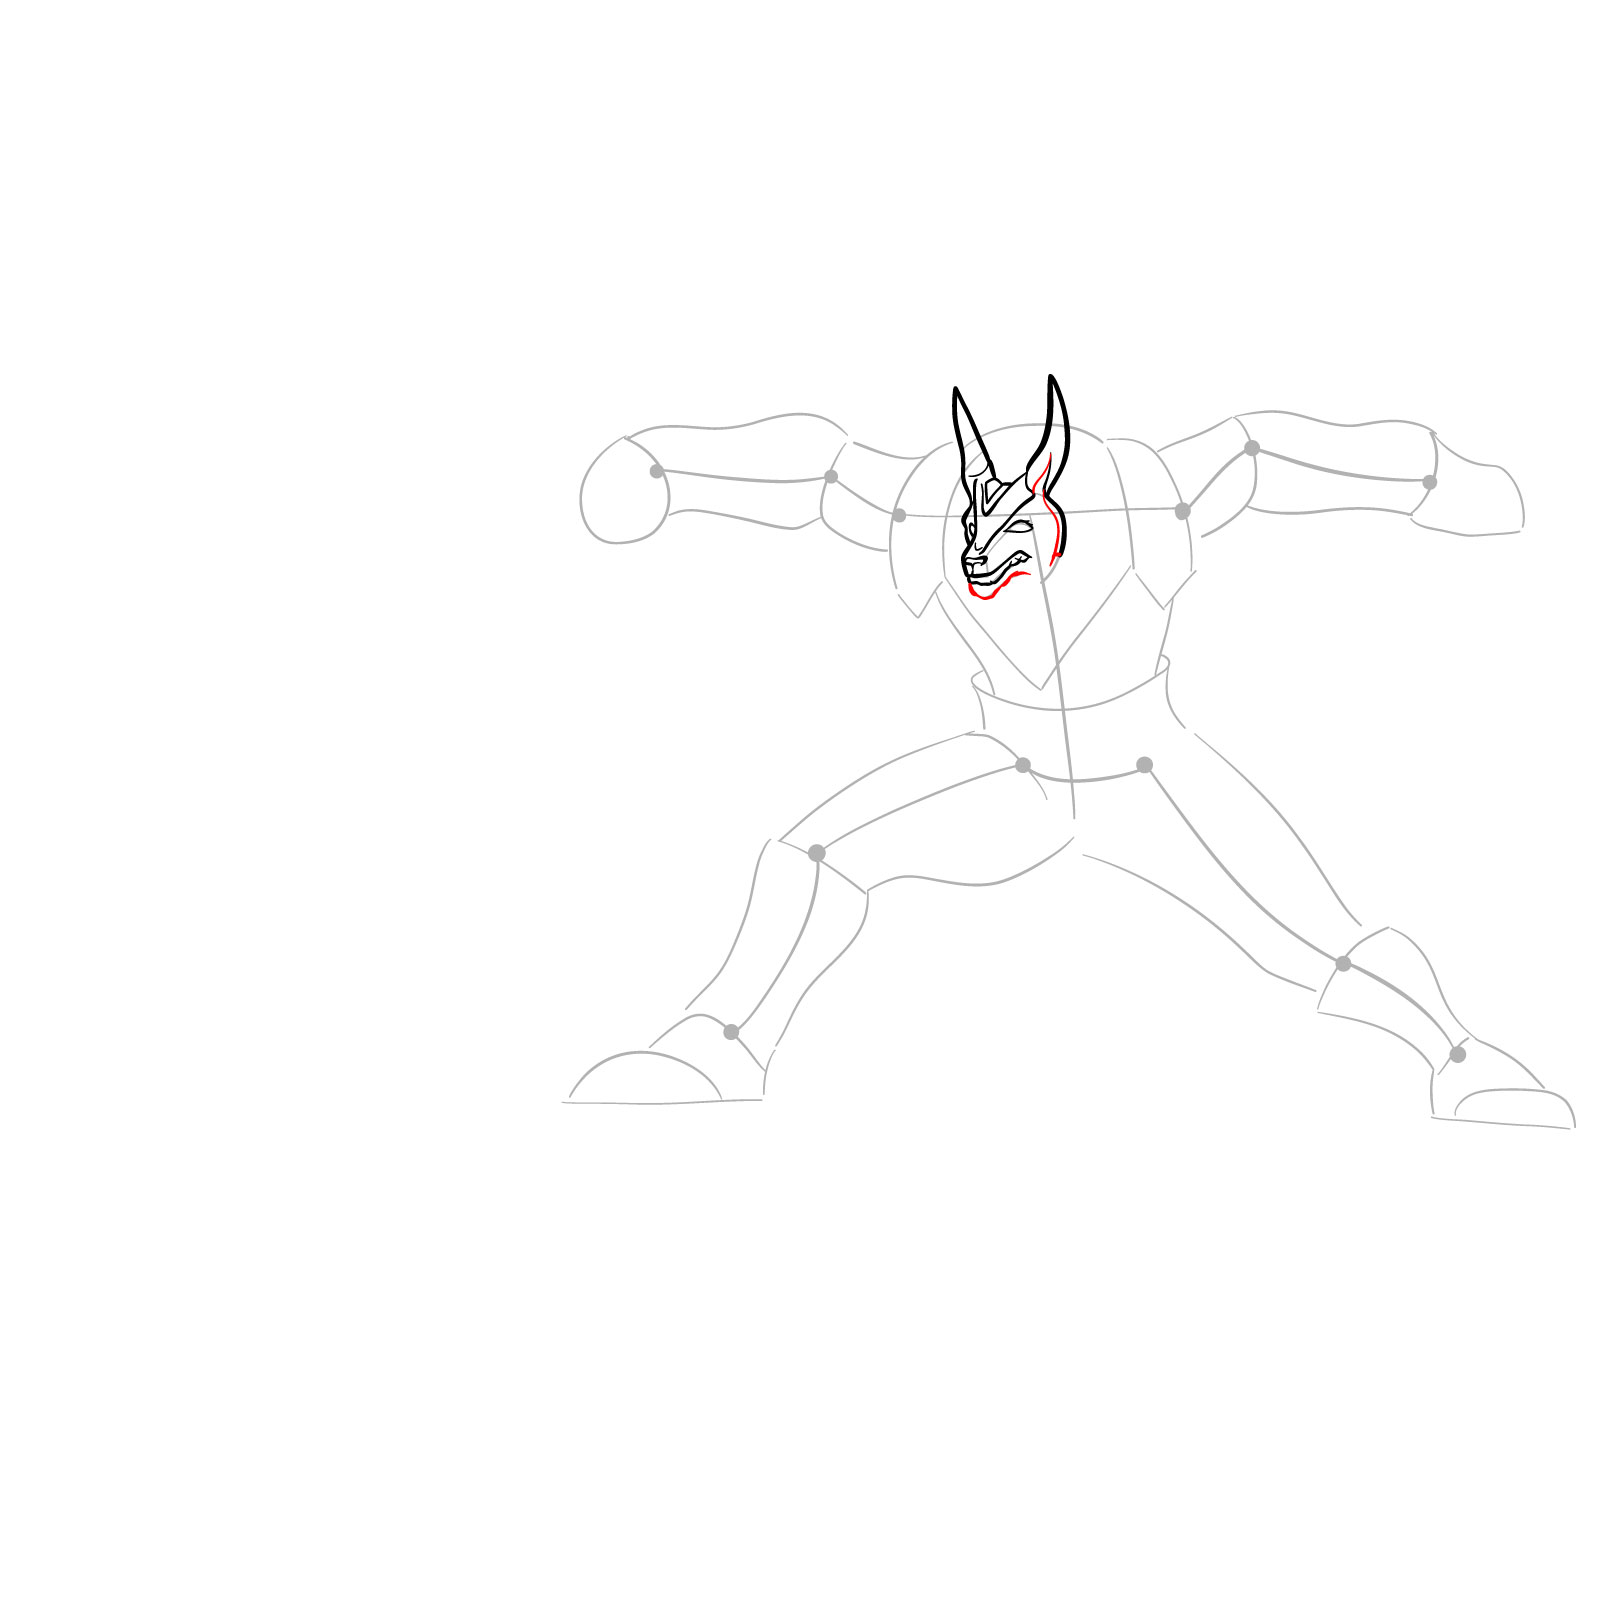 How to draw Nasus - League of Legends - step 11